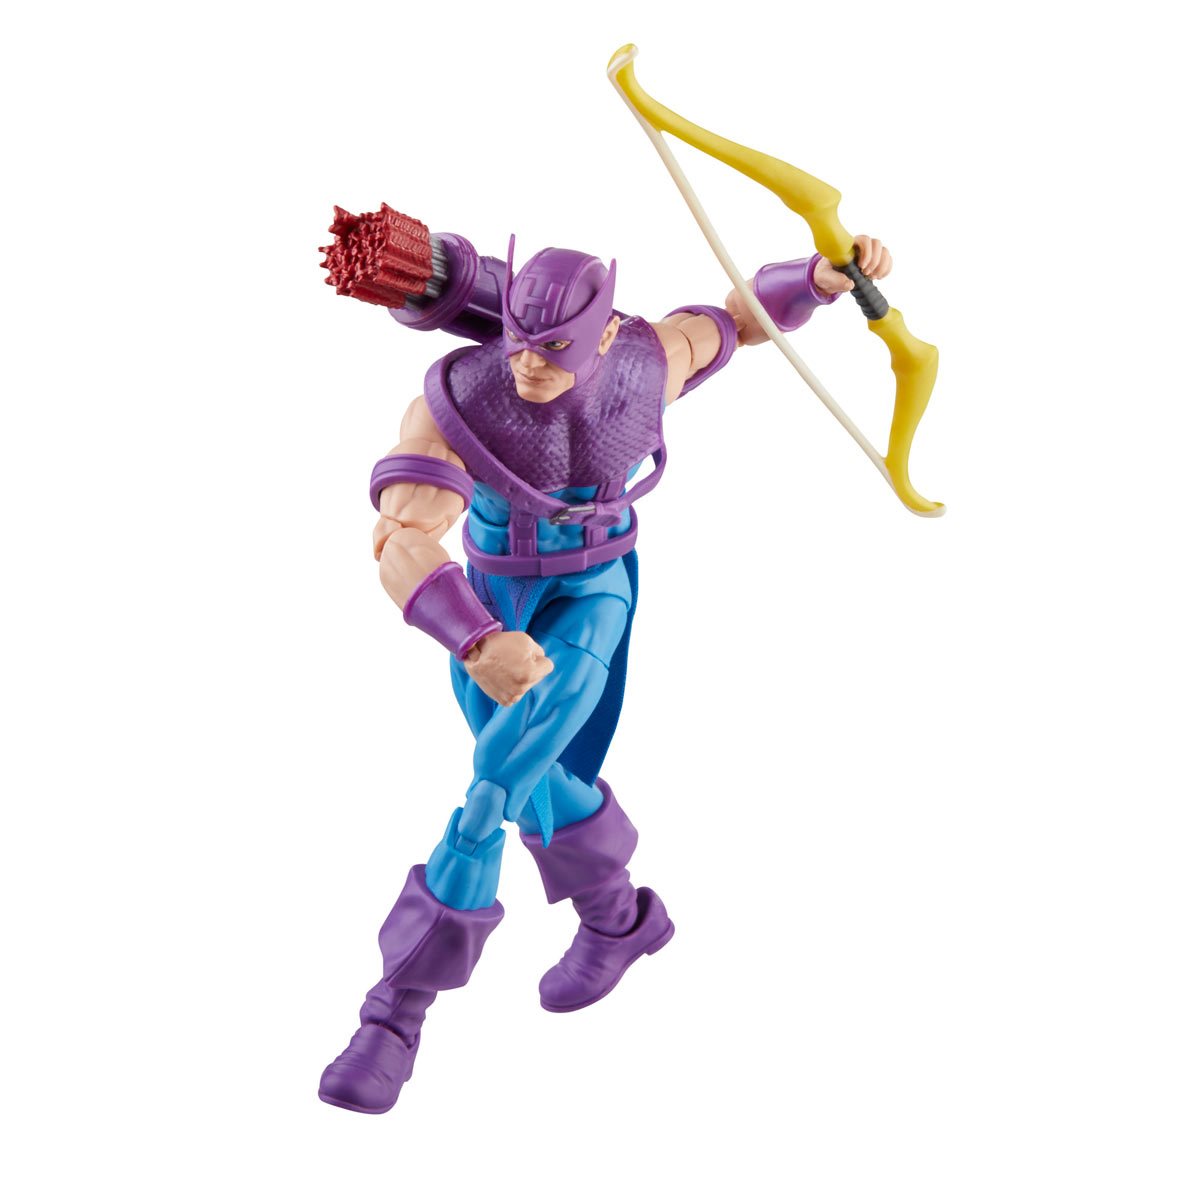 Avengers 60th Anniversary Marvel Legends Hawkeye with Sky-Cycle Hasbro